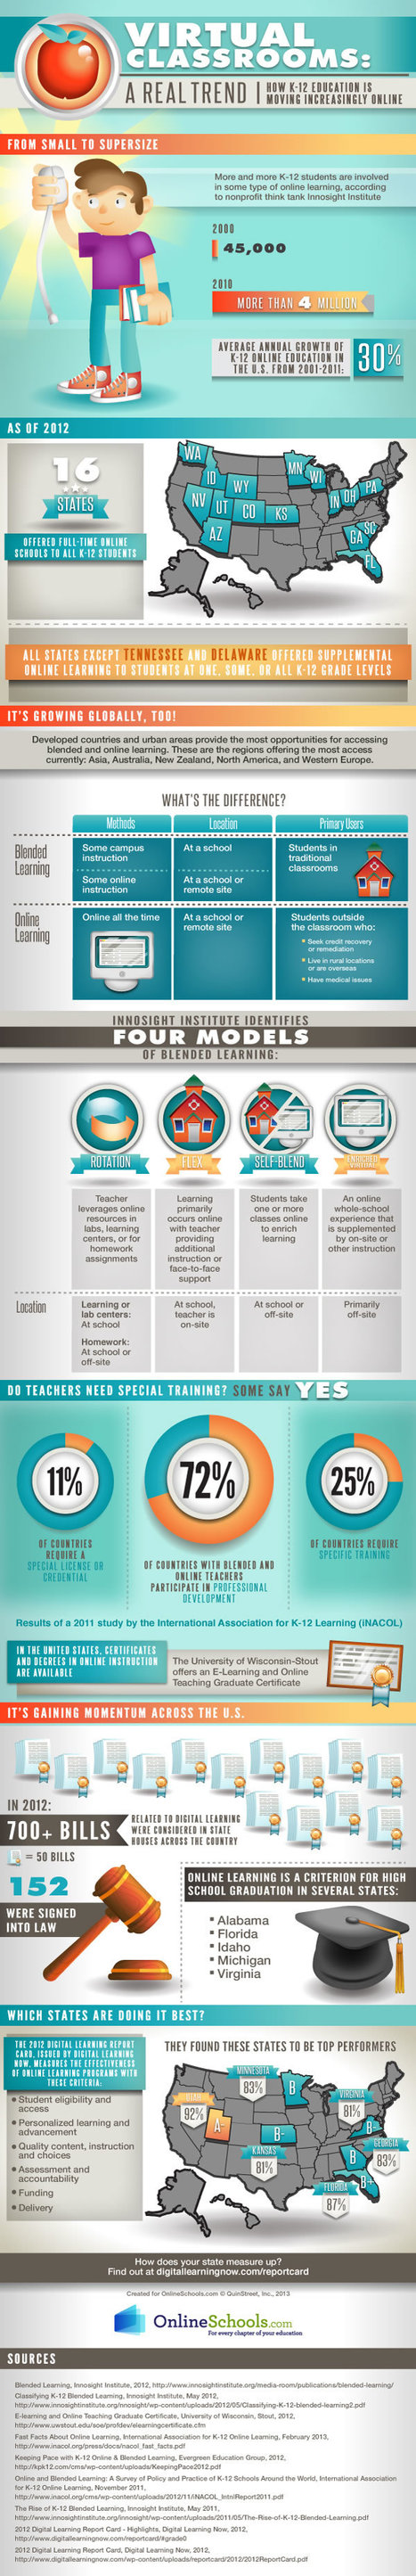 The Teacher's Quick Guide To Blended Learning [Infographic] | 21st Century Learning and Teaching | Scoop.it